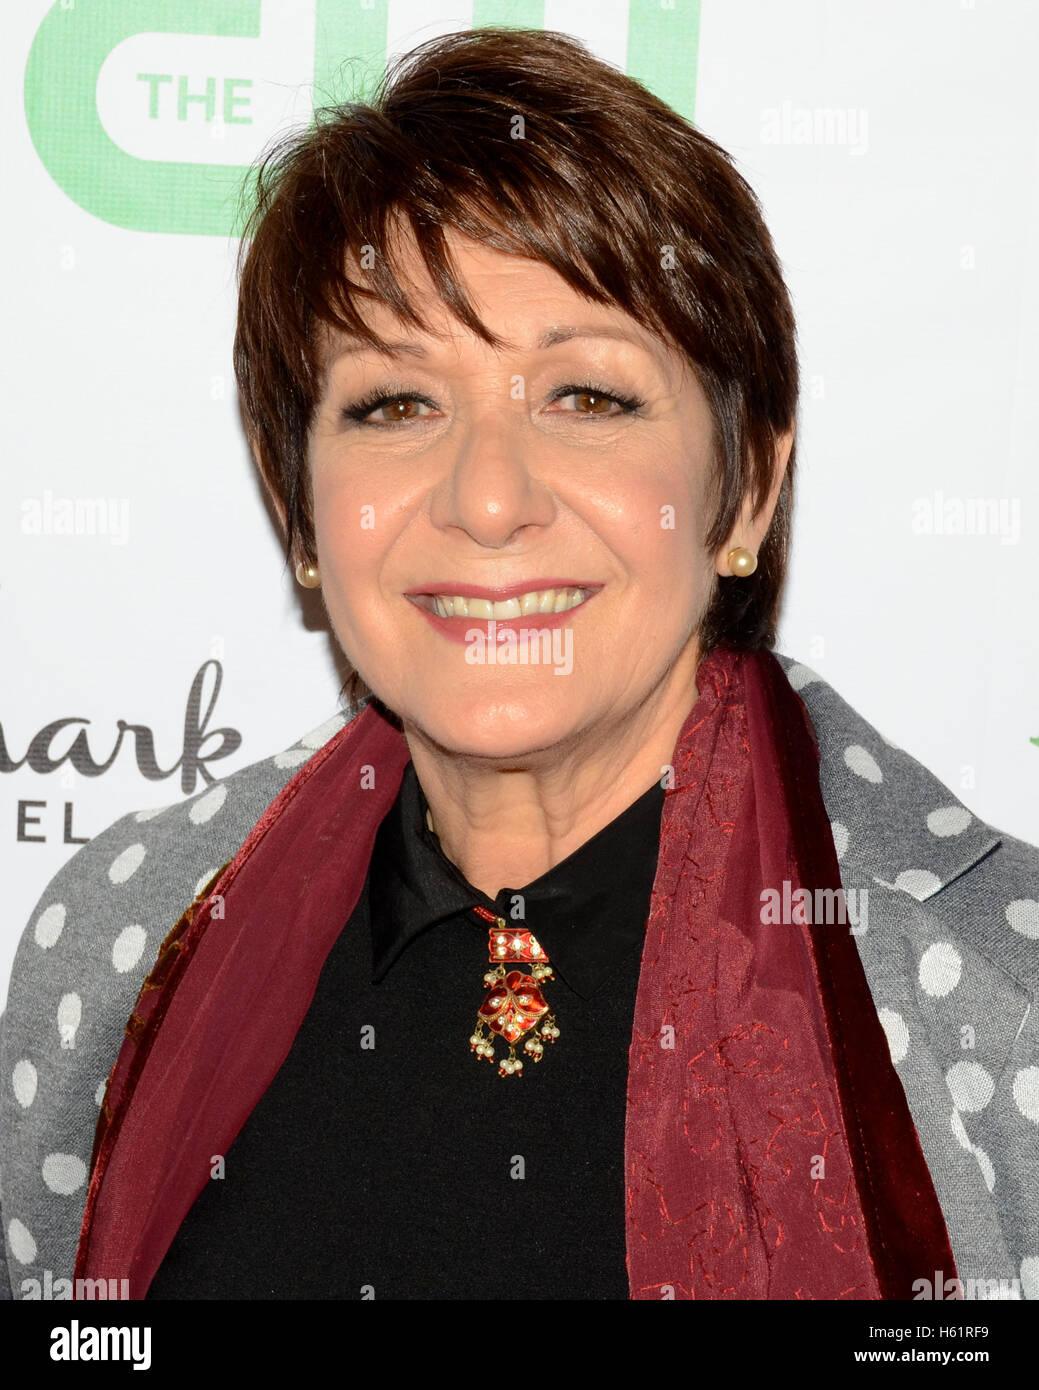 Ivonne Coll Stock Photos & Ivonne Coll Stock Images - Alamy